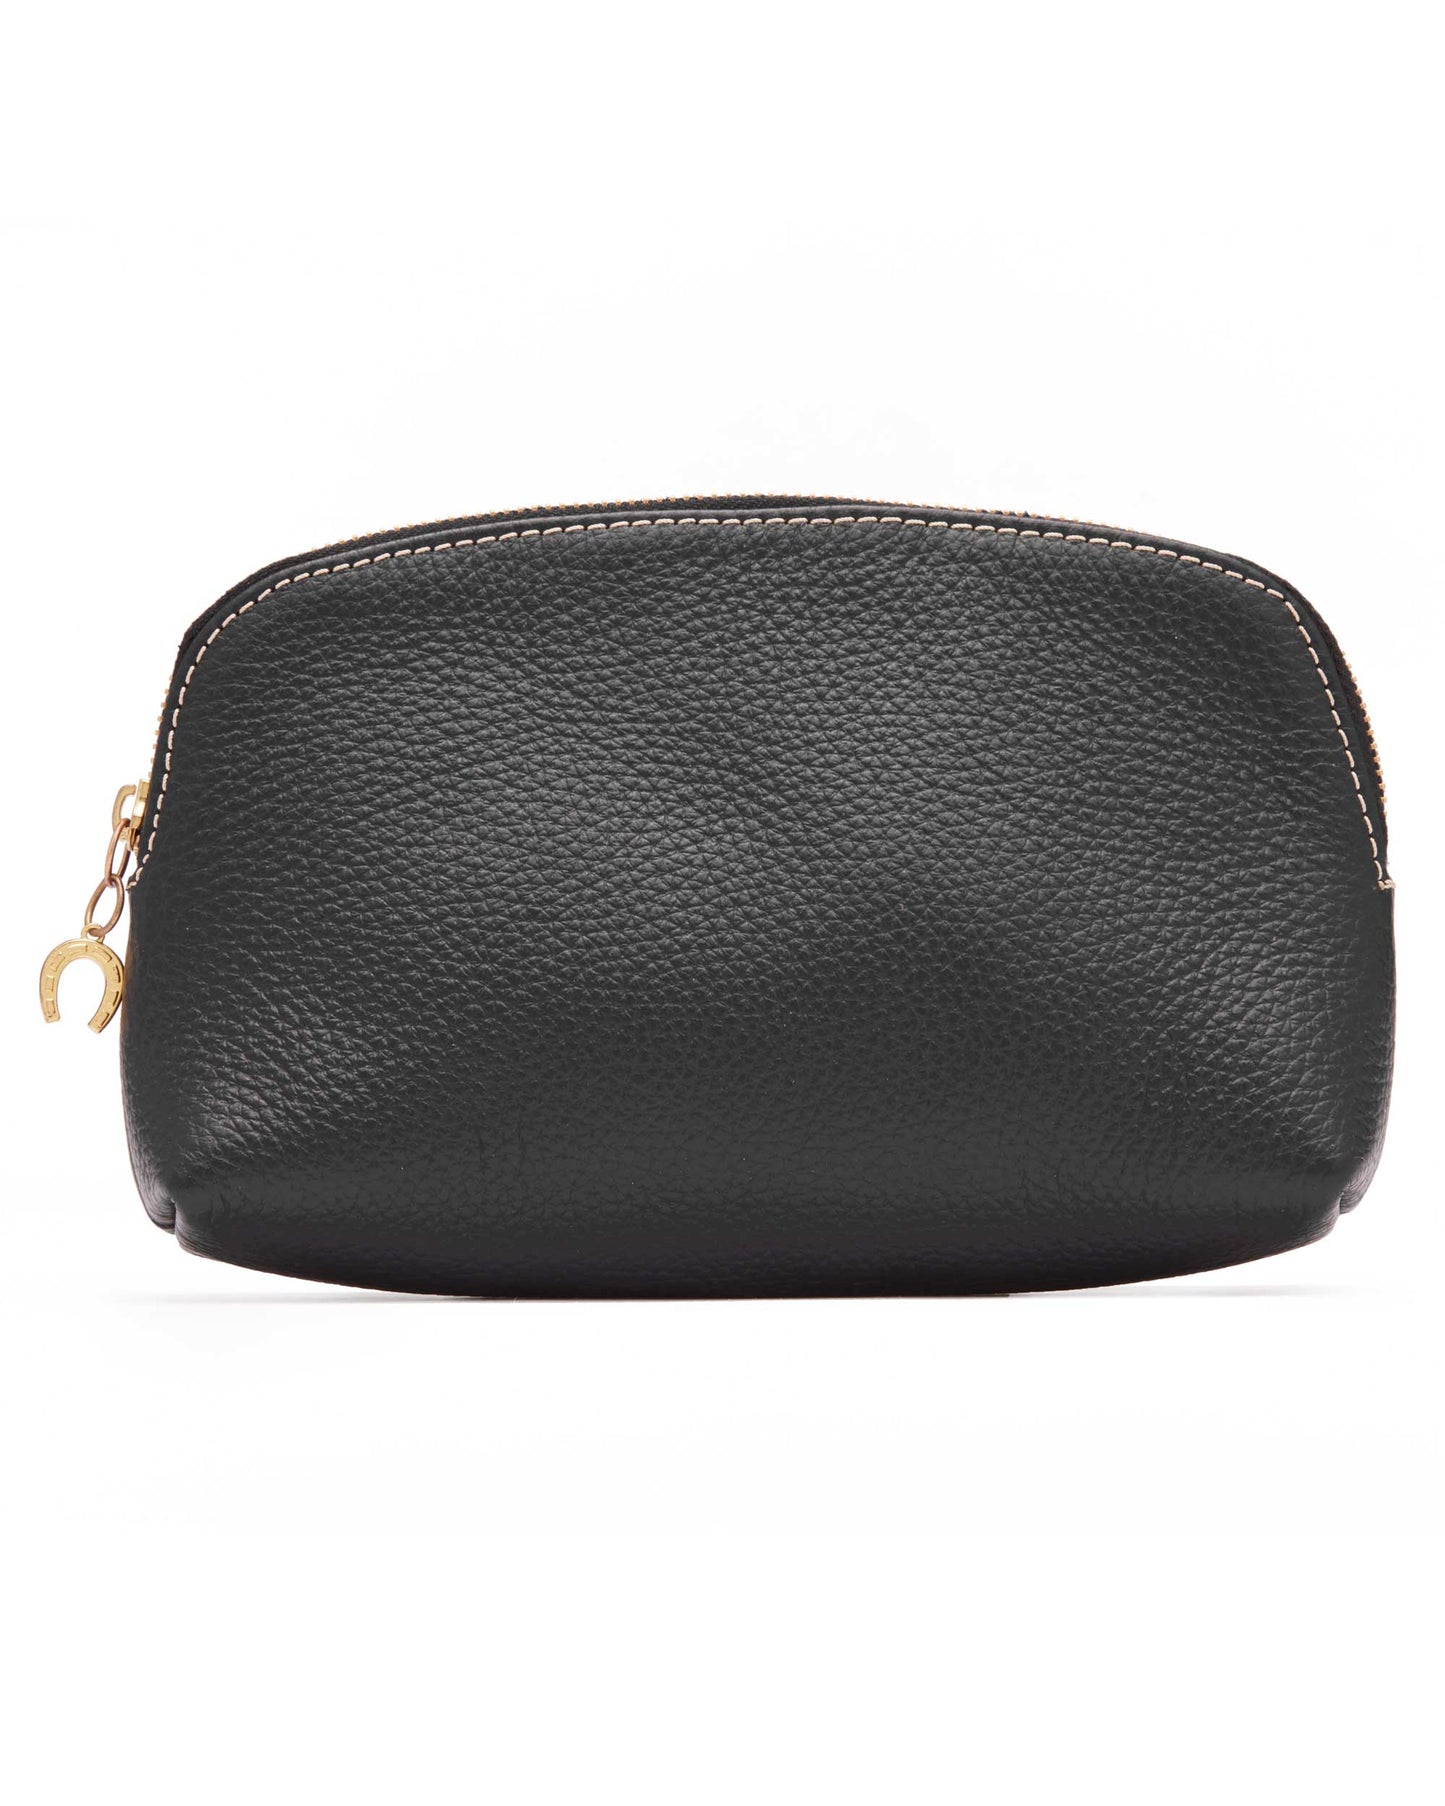 The Sanchia Pochette - Leather Cosmetic Pouch